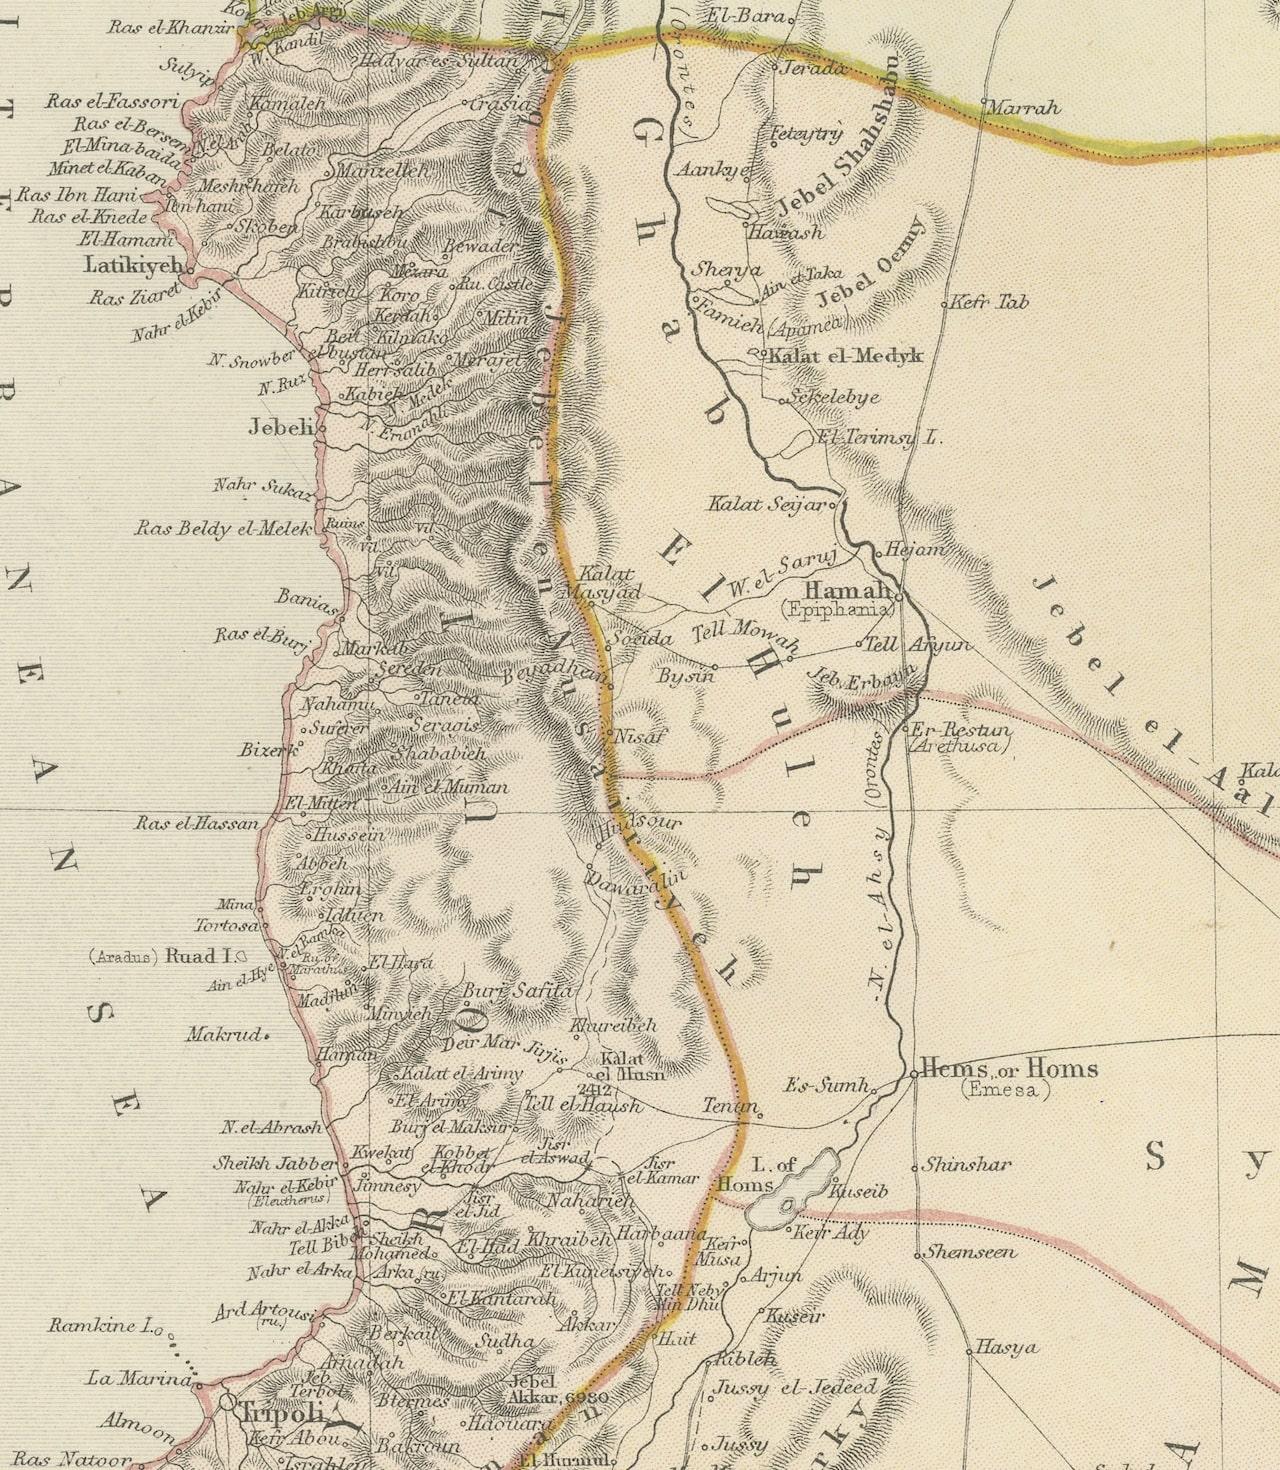 old map of syria